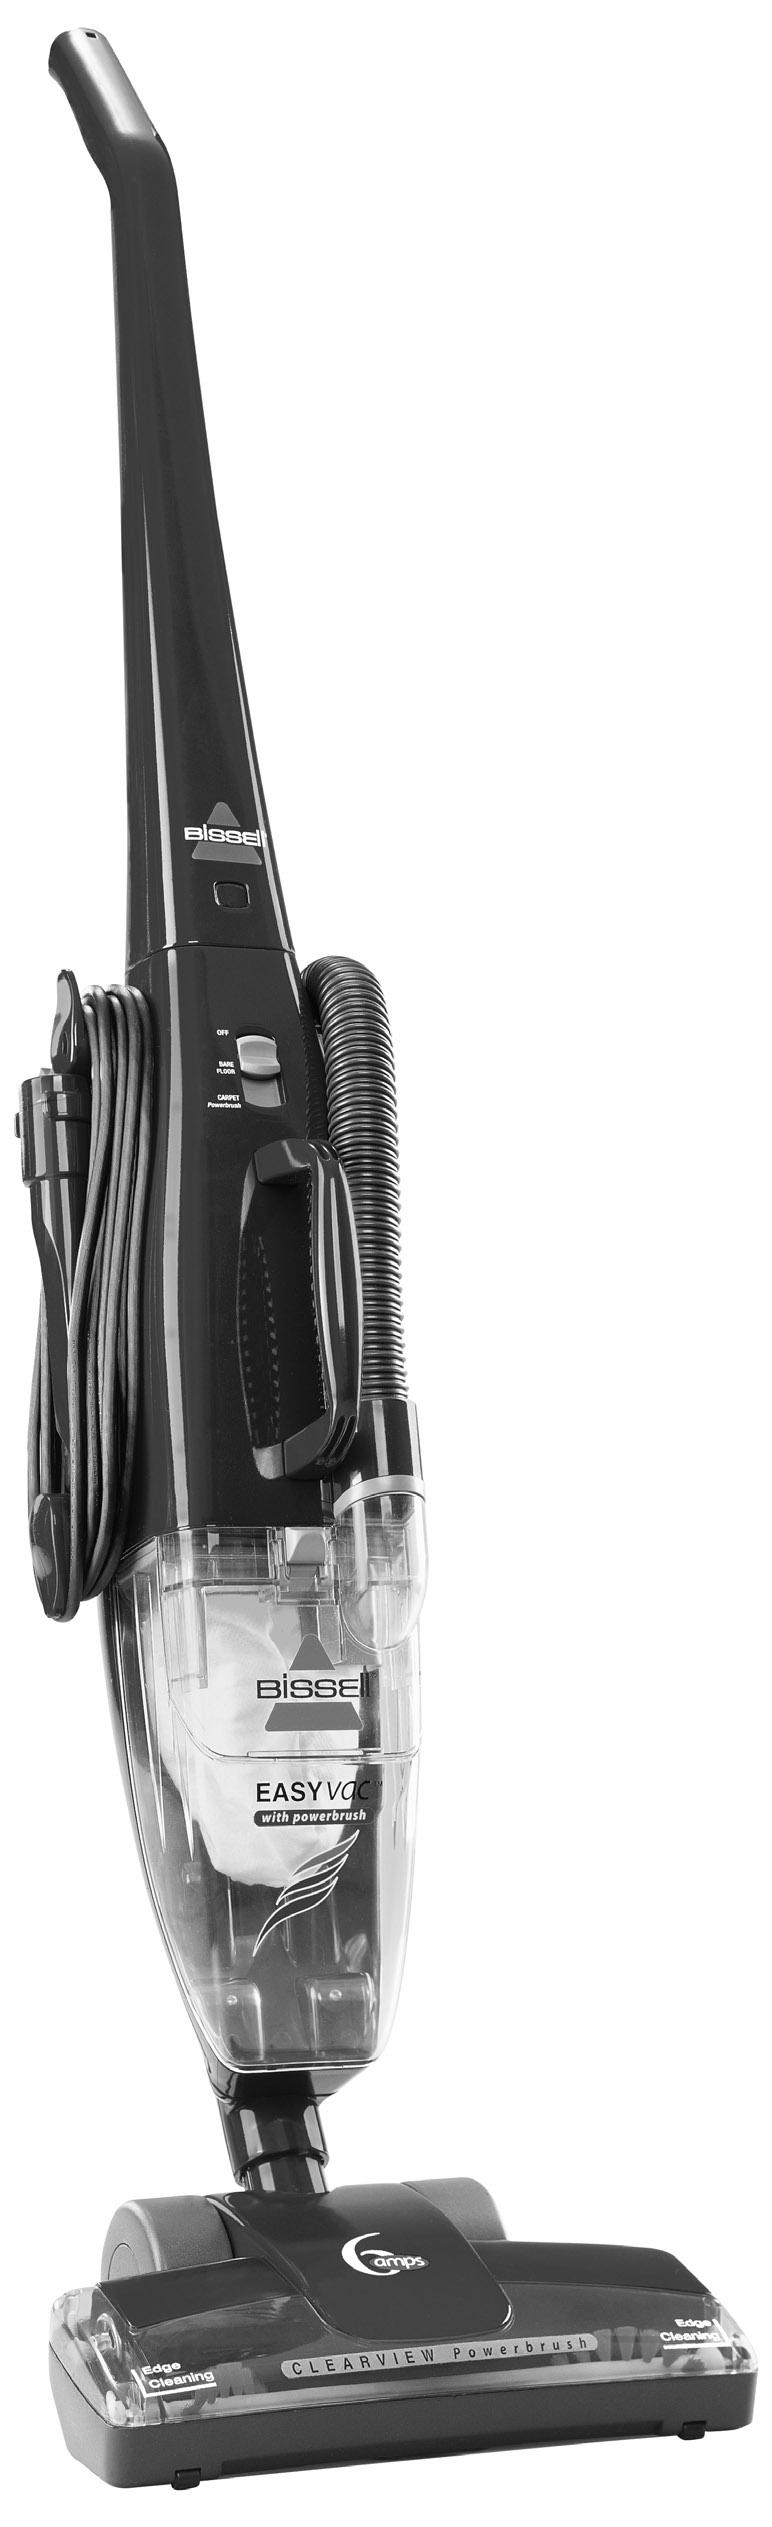 Easy Vac PowerBrush USER S GUIDE 3108 SERIES 3 Safety